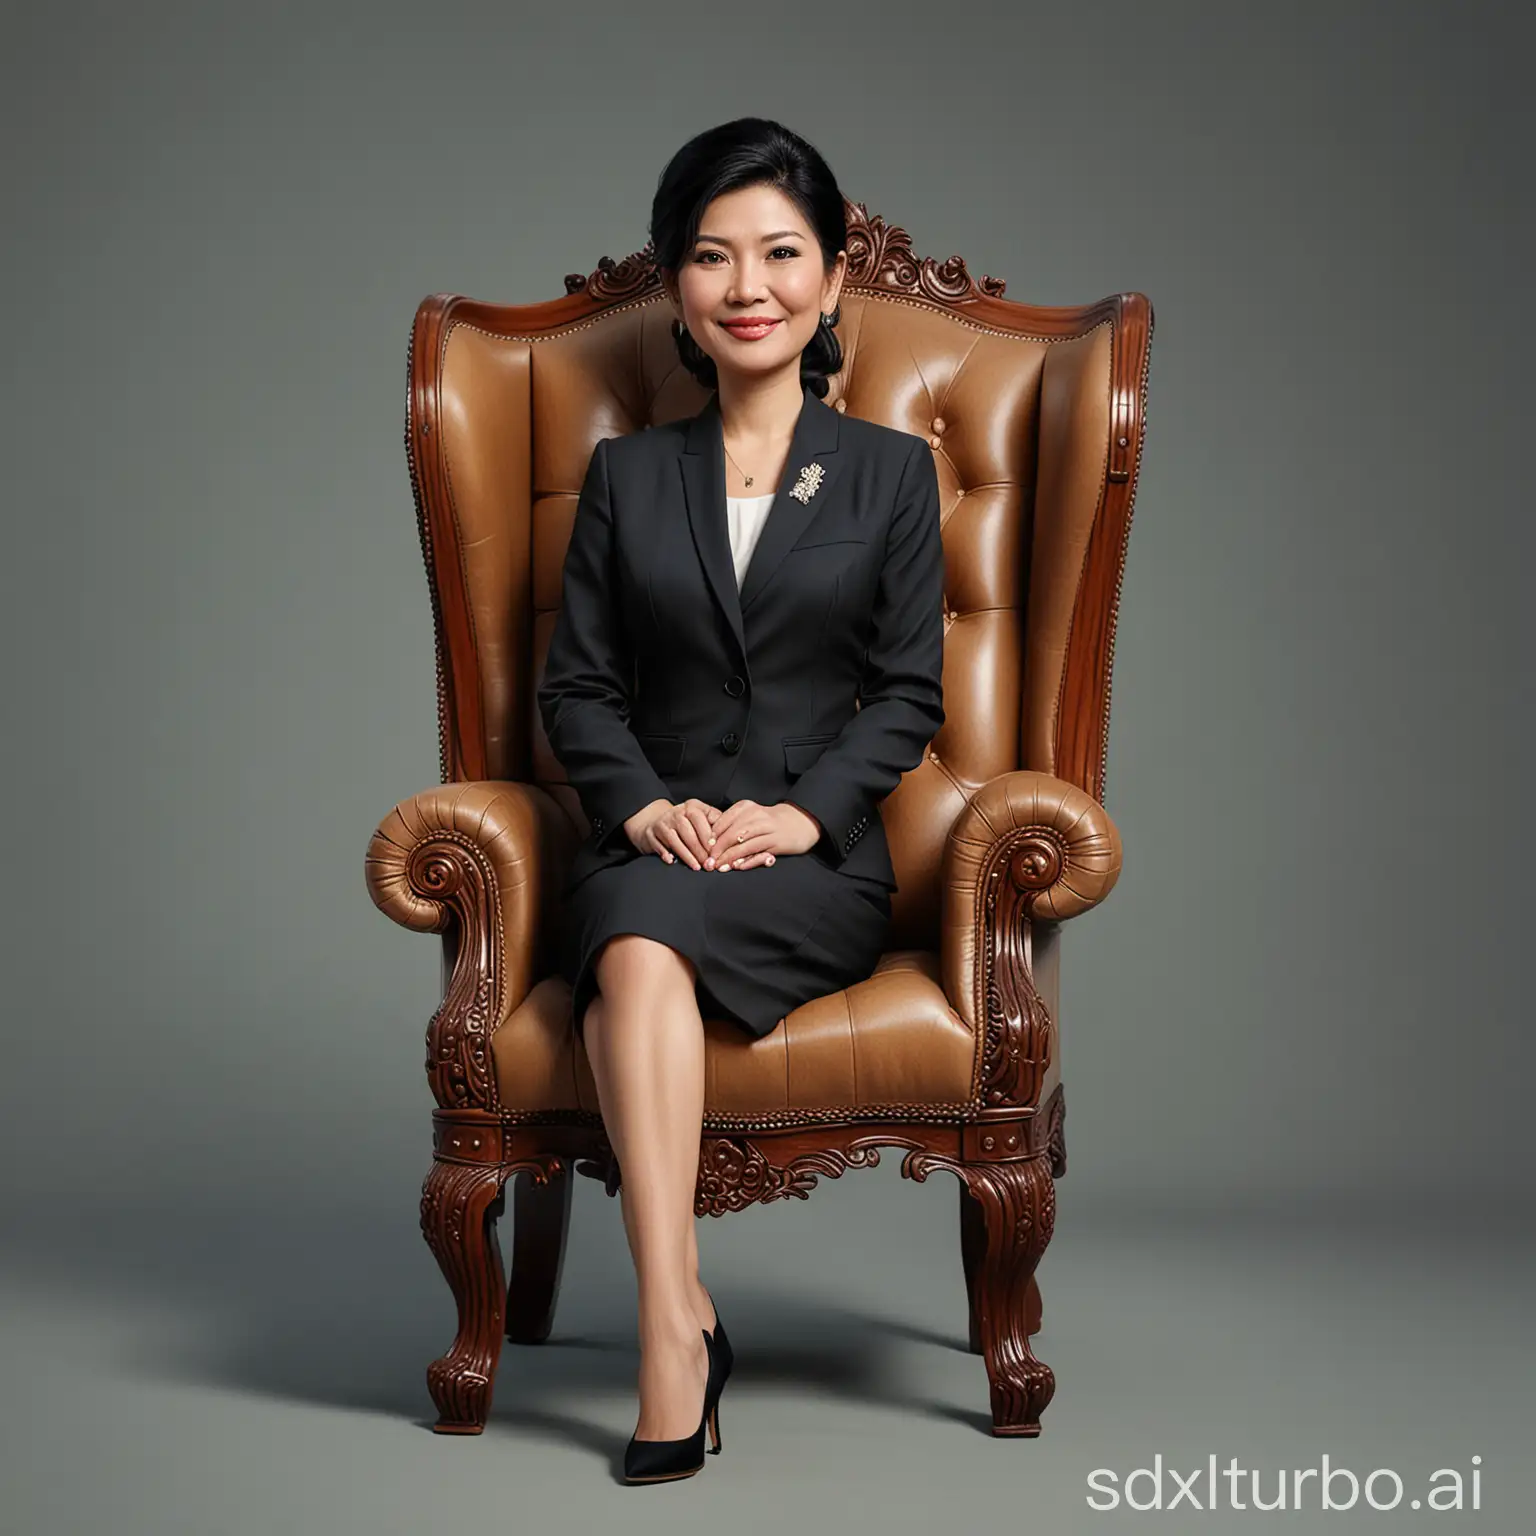  Create a 3D Realistic Caricature style full body of Yingluck Shinawatra, a 45-year-old woman, with an oversized head. She is depicted sitting comfortably in a classic black wooden wingback chair with visible wood texture. She is dressed in the attire of the Thai prime minister. Her right leg is positioned near her left leg, and she holds the baton of the Thai prime minister in her right hand. Her left hand rests on the edge of the chair. The background should contrast with the color of the chair and clothing to enhance the overall composition of the picture. Utilize soft photographic lighting with a dramatic overhead lighting effect, very high image quality, clear character details, UHD, 16k.